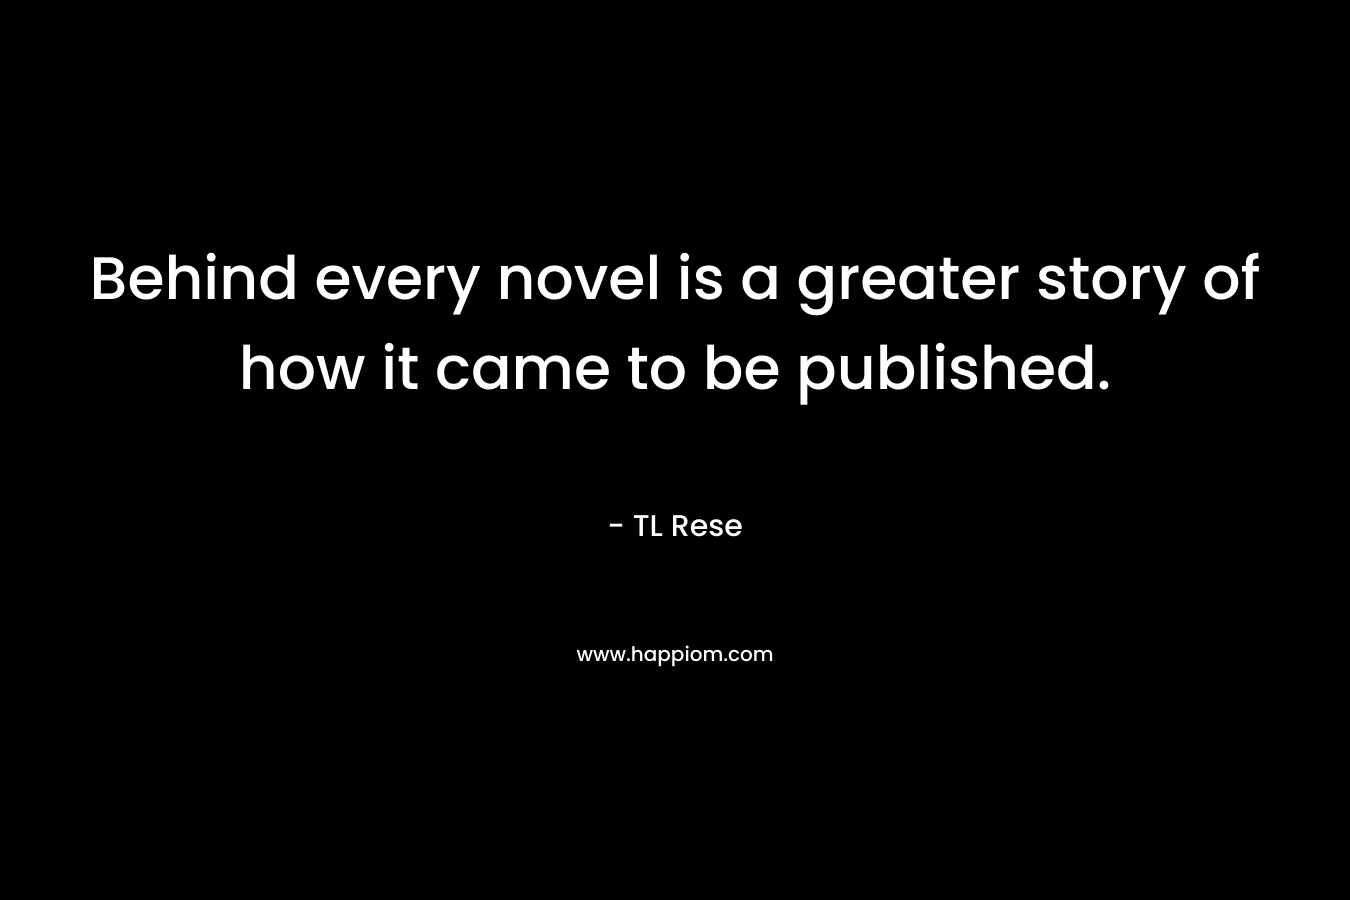 Behind every novel is a greater story of how it came to be published. – TL Rese